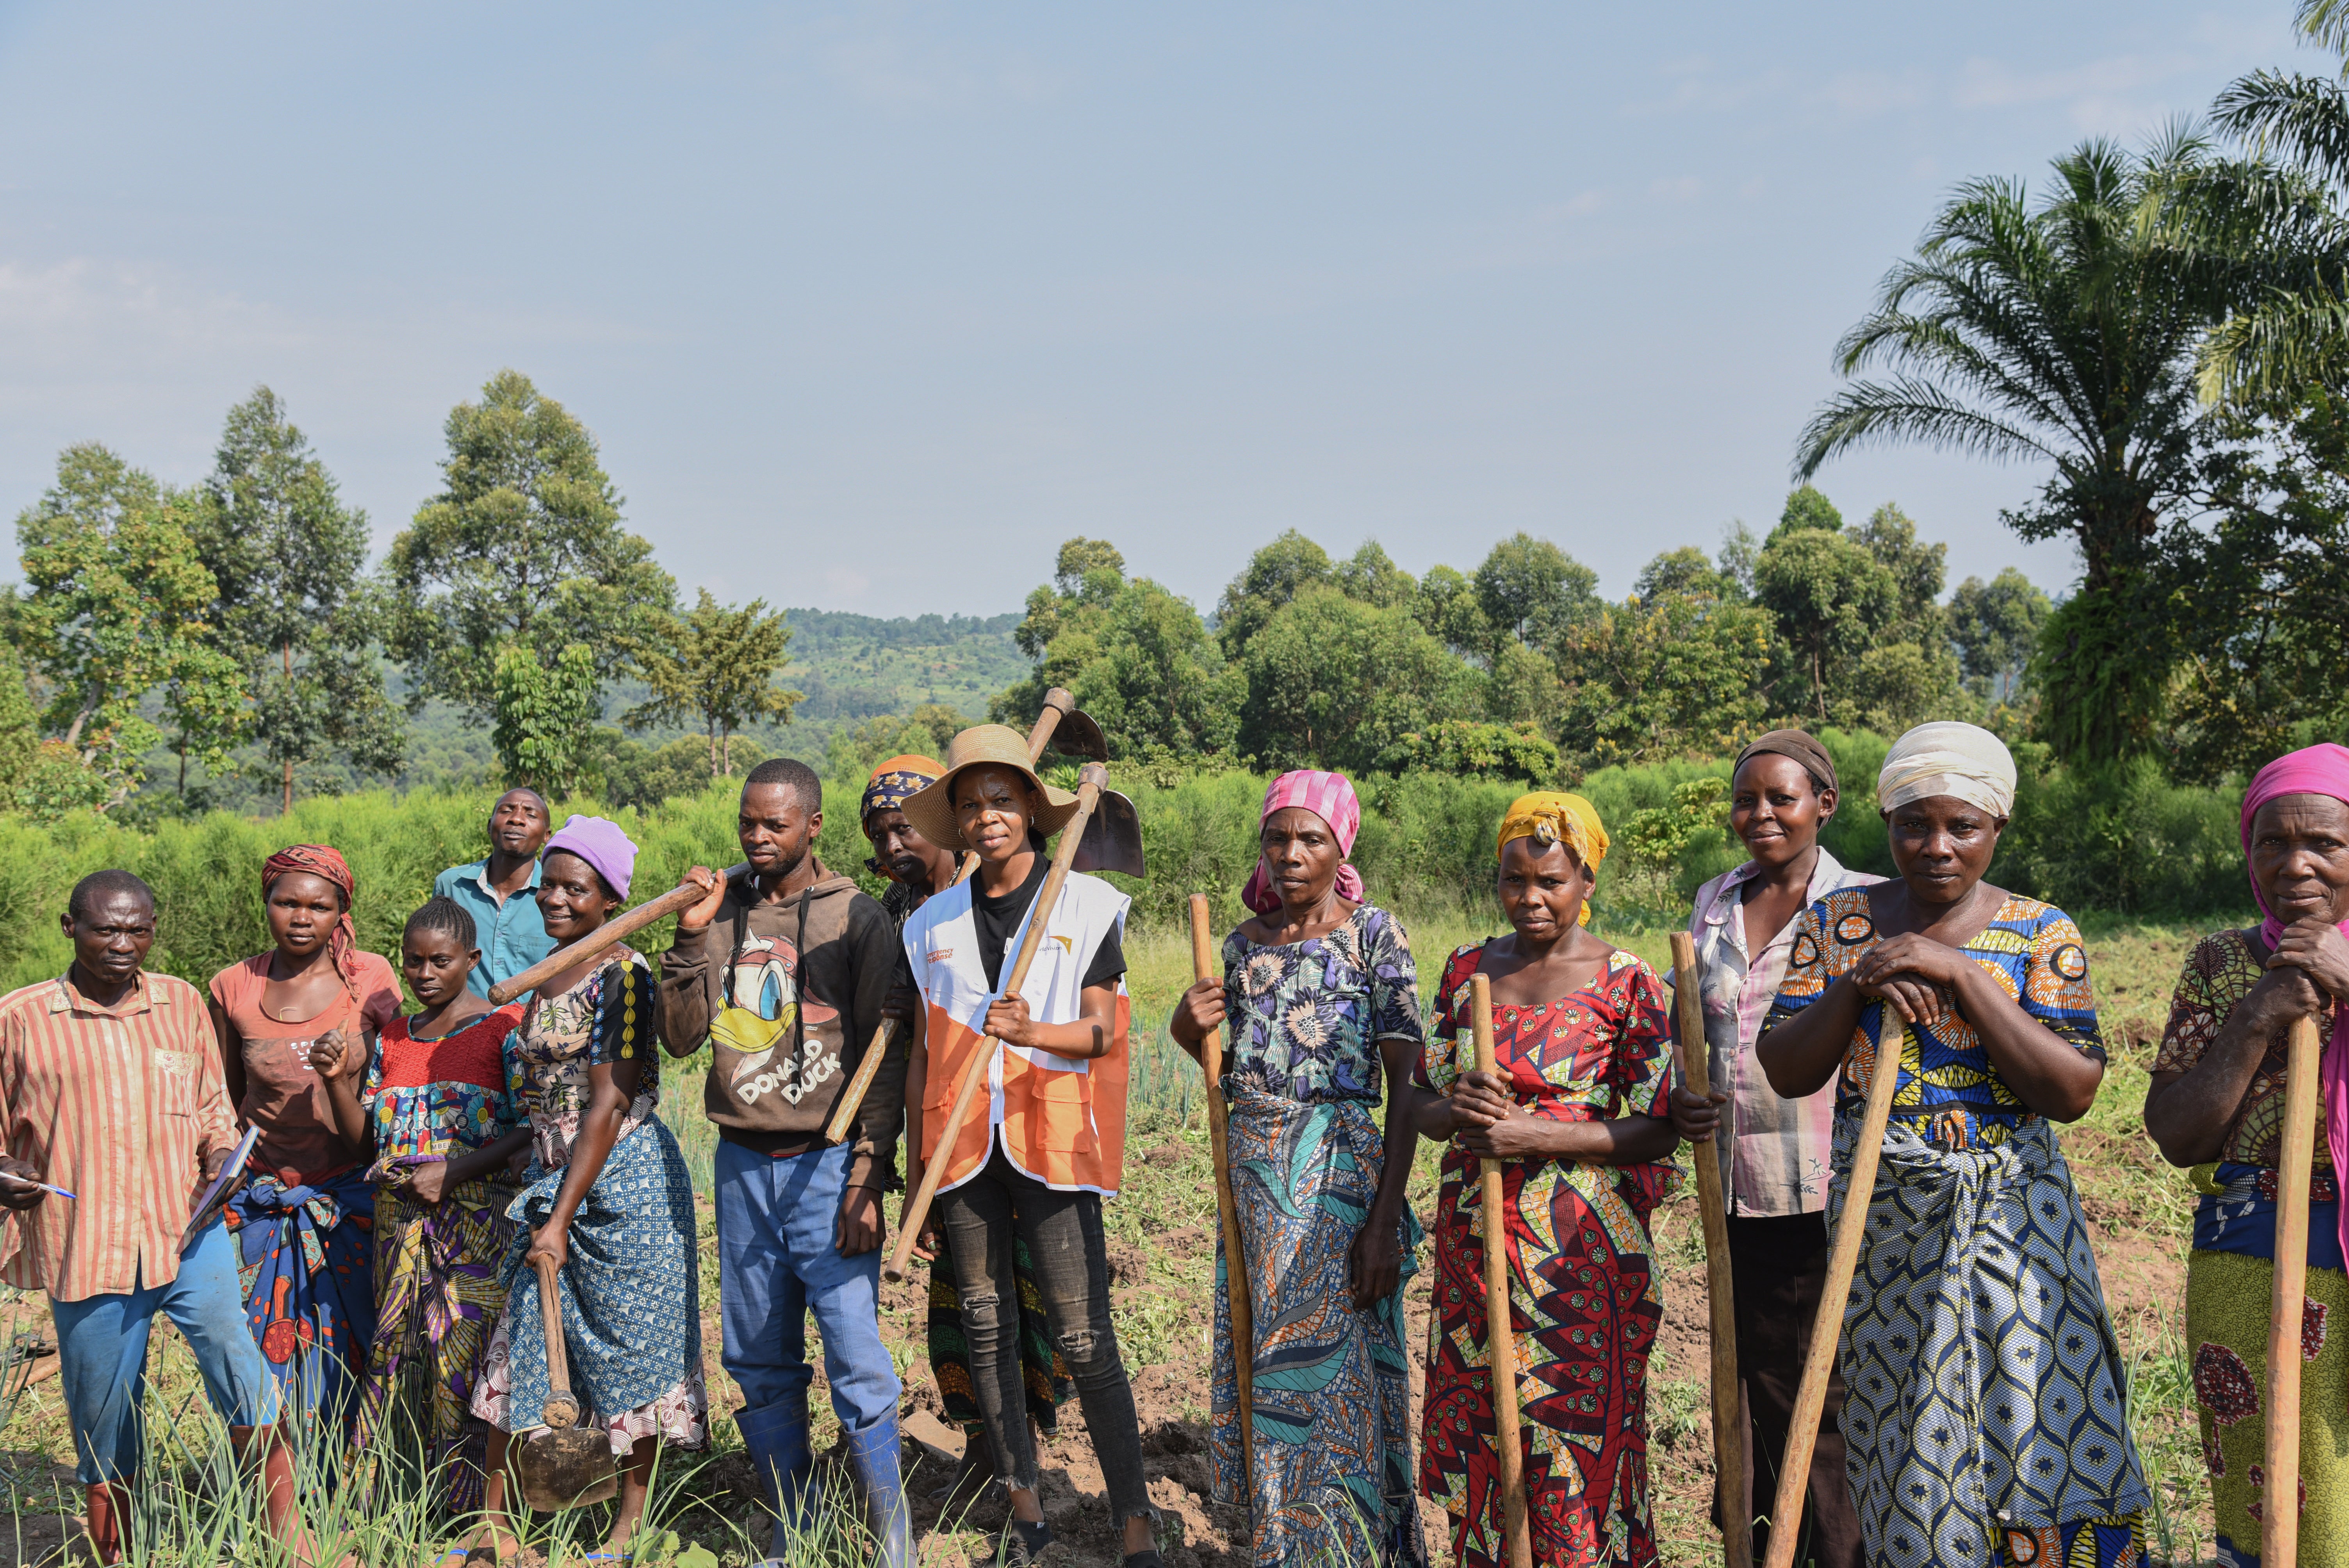 A group of farmers stand together in a field holding shovels and tools. 